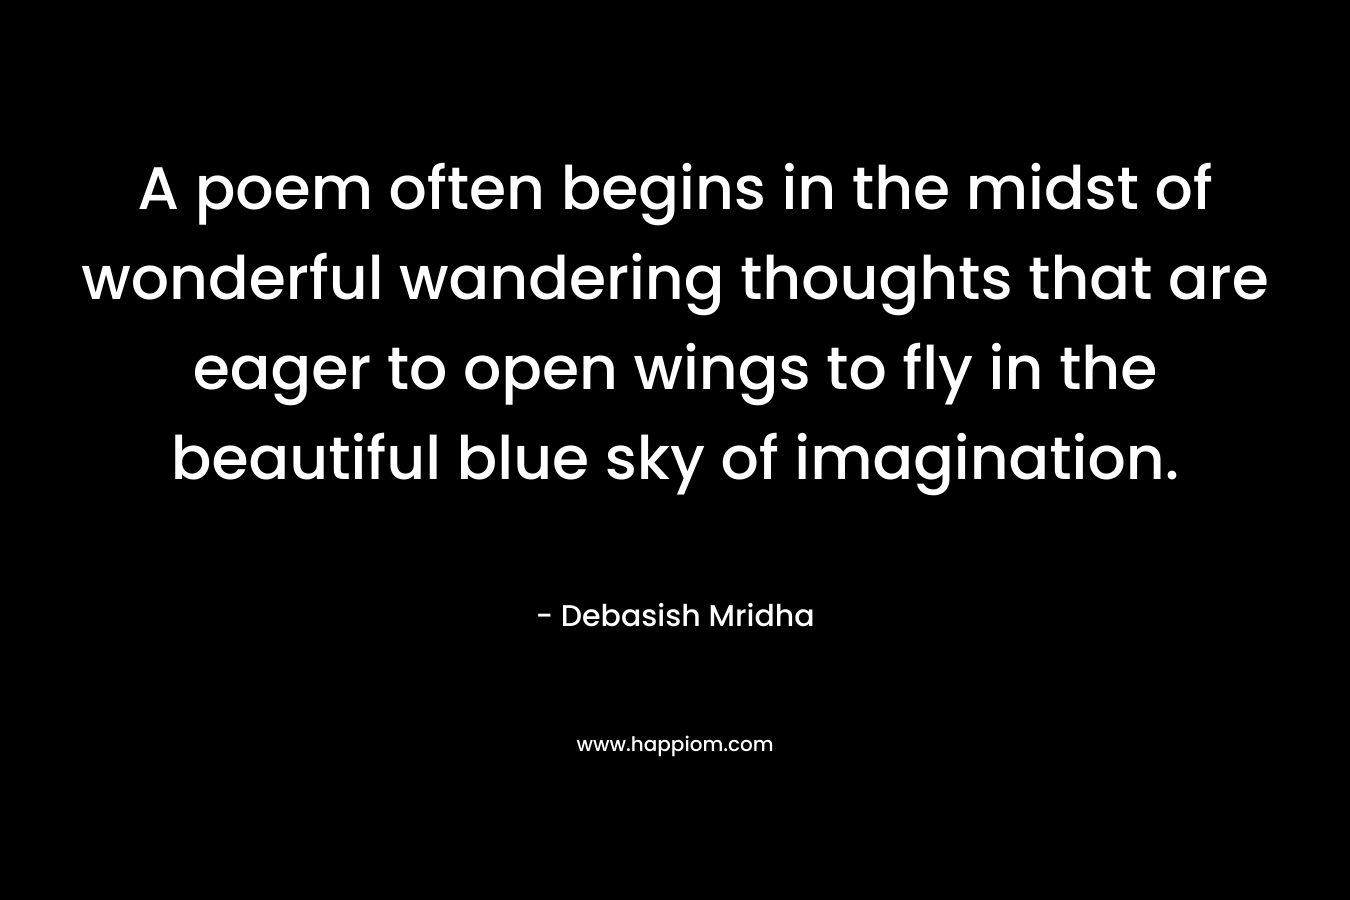 A poem often begins in the midst of wonderful wandering thoughts that are eager to open wings to fly in the beautiful blue sky of imagination.